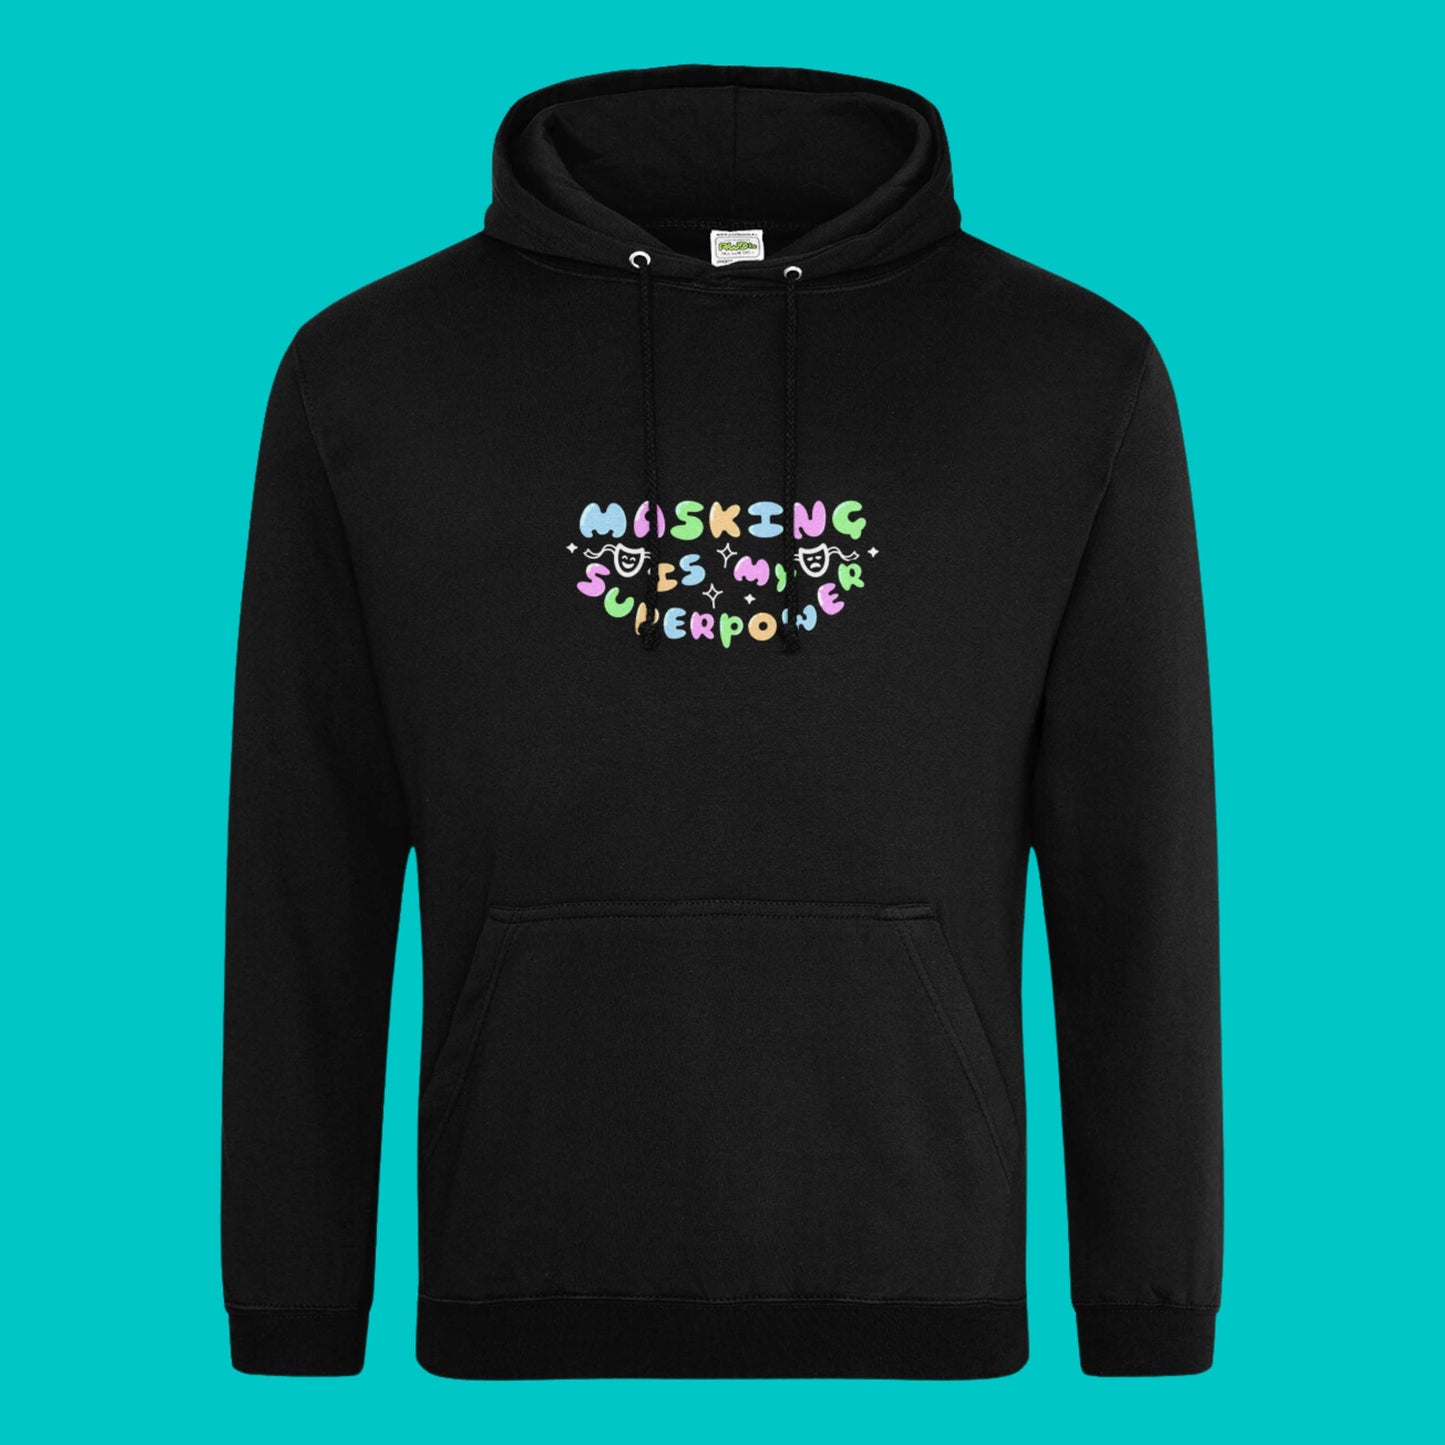 The deep black Masking Is My Super Power Hoodie on a blue background. The black hoodie features pastel rainbow bubble writing that reads 'masking is my superpower' with white sparkles, a happy and sad drama masks all on a black oval. Raising awareness for neurodivergent people with ADHD or Autism.